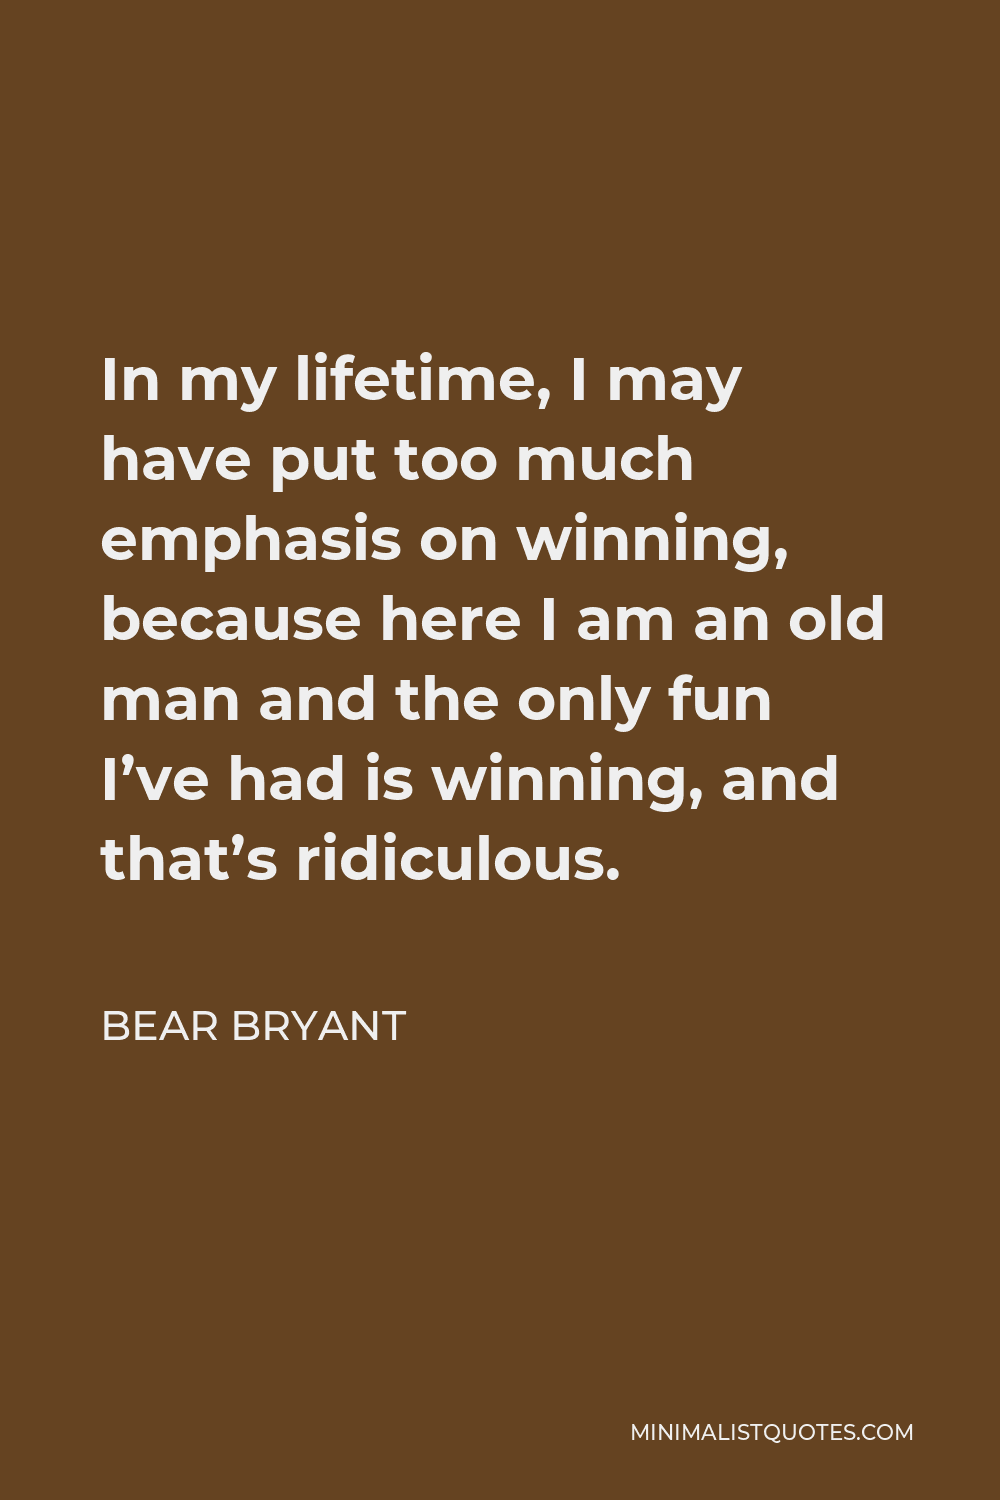 Bear Bryant Quote - In my lifetime, I may have put too much emphasis on winning, because here I am an old man and the only fun I’ve had is winning, and that’s ridiculous.